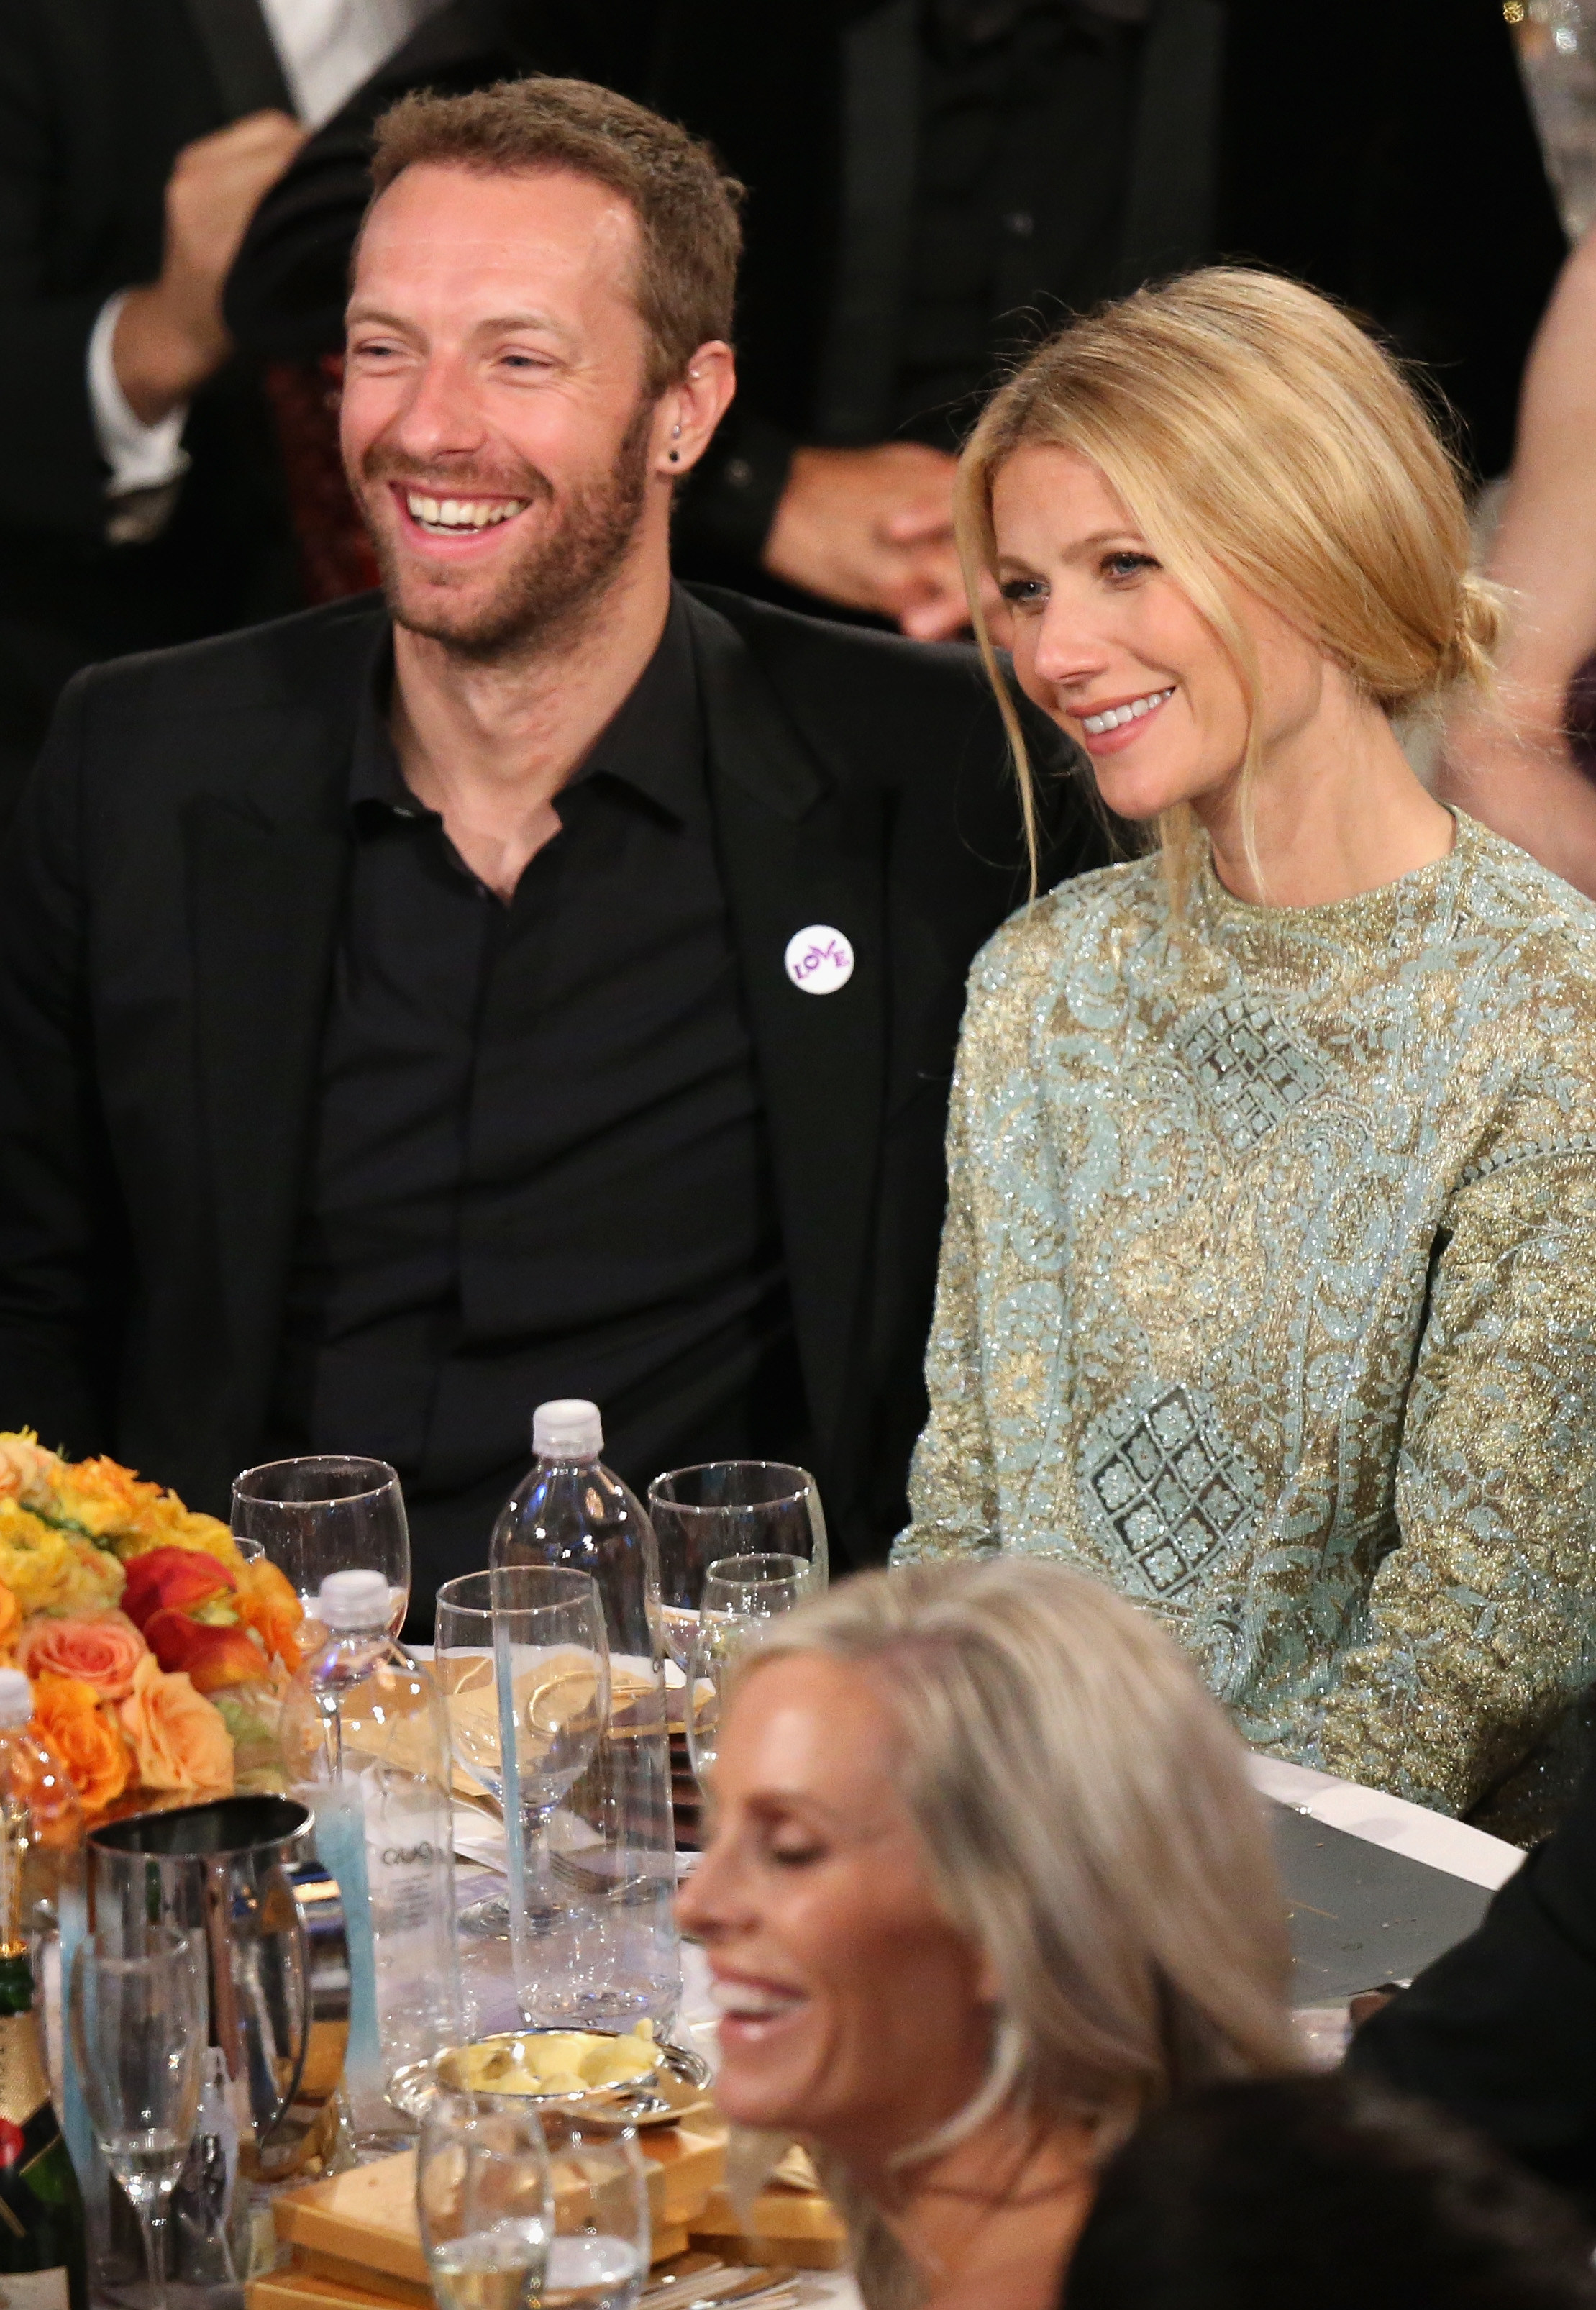 Chris Martin and Gwyneth Paltrow sitting together at an event